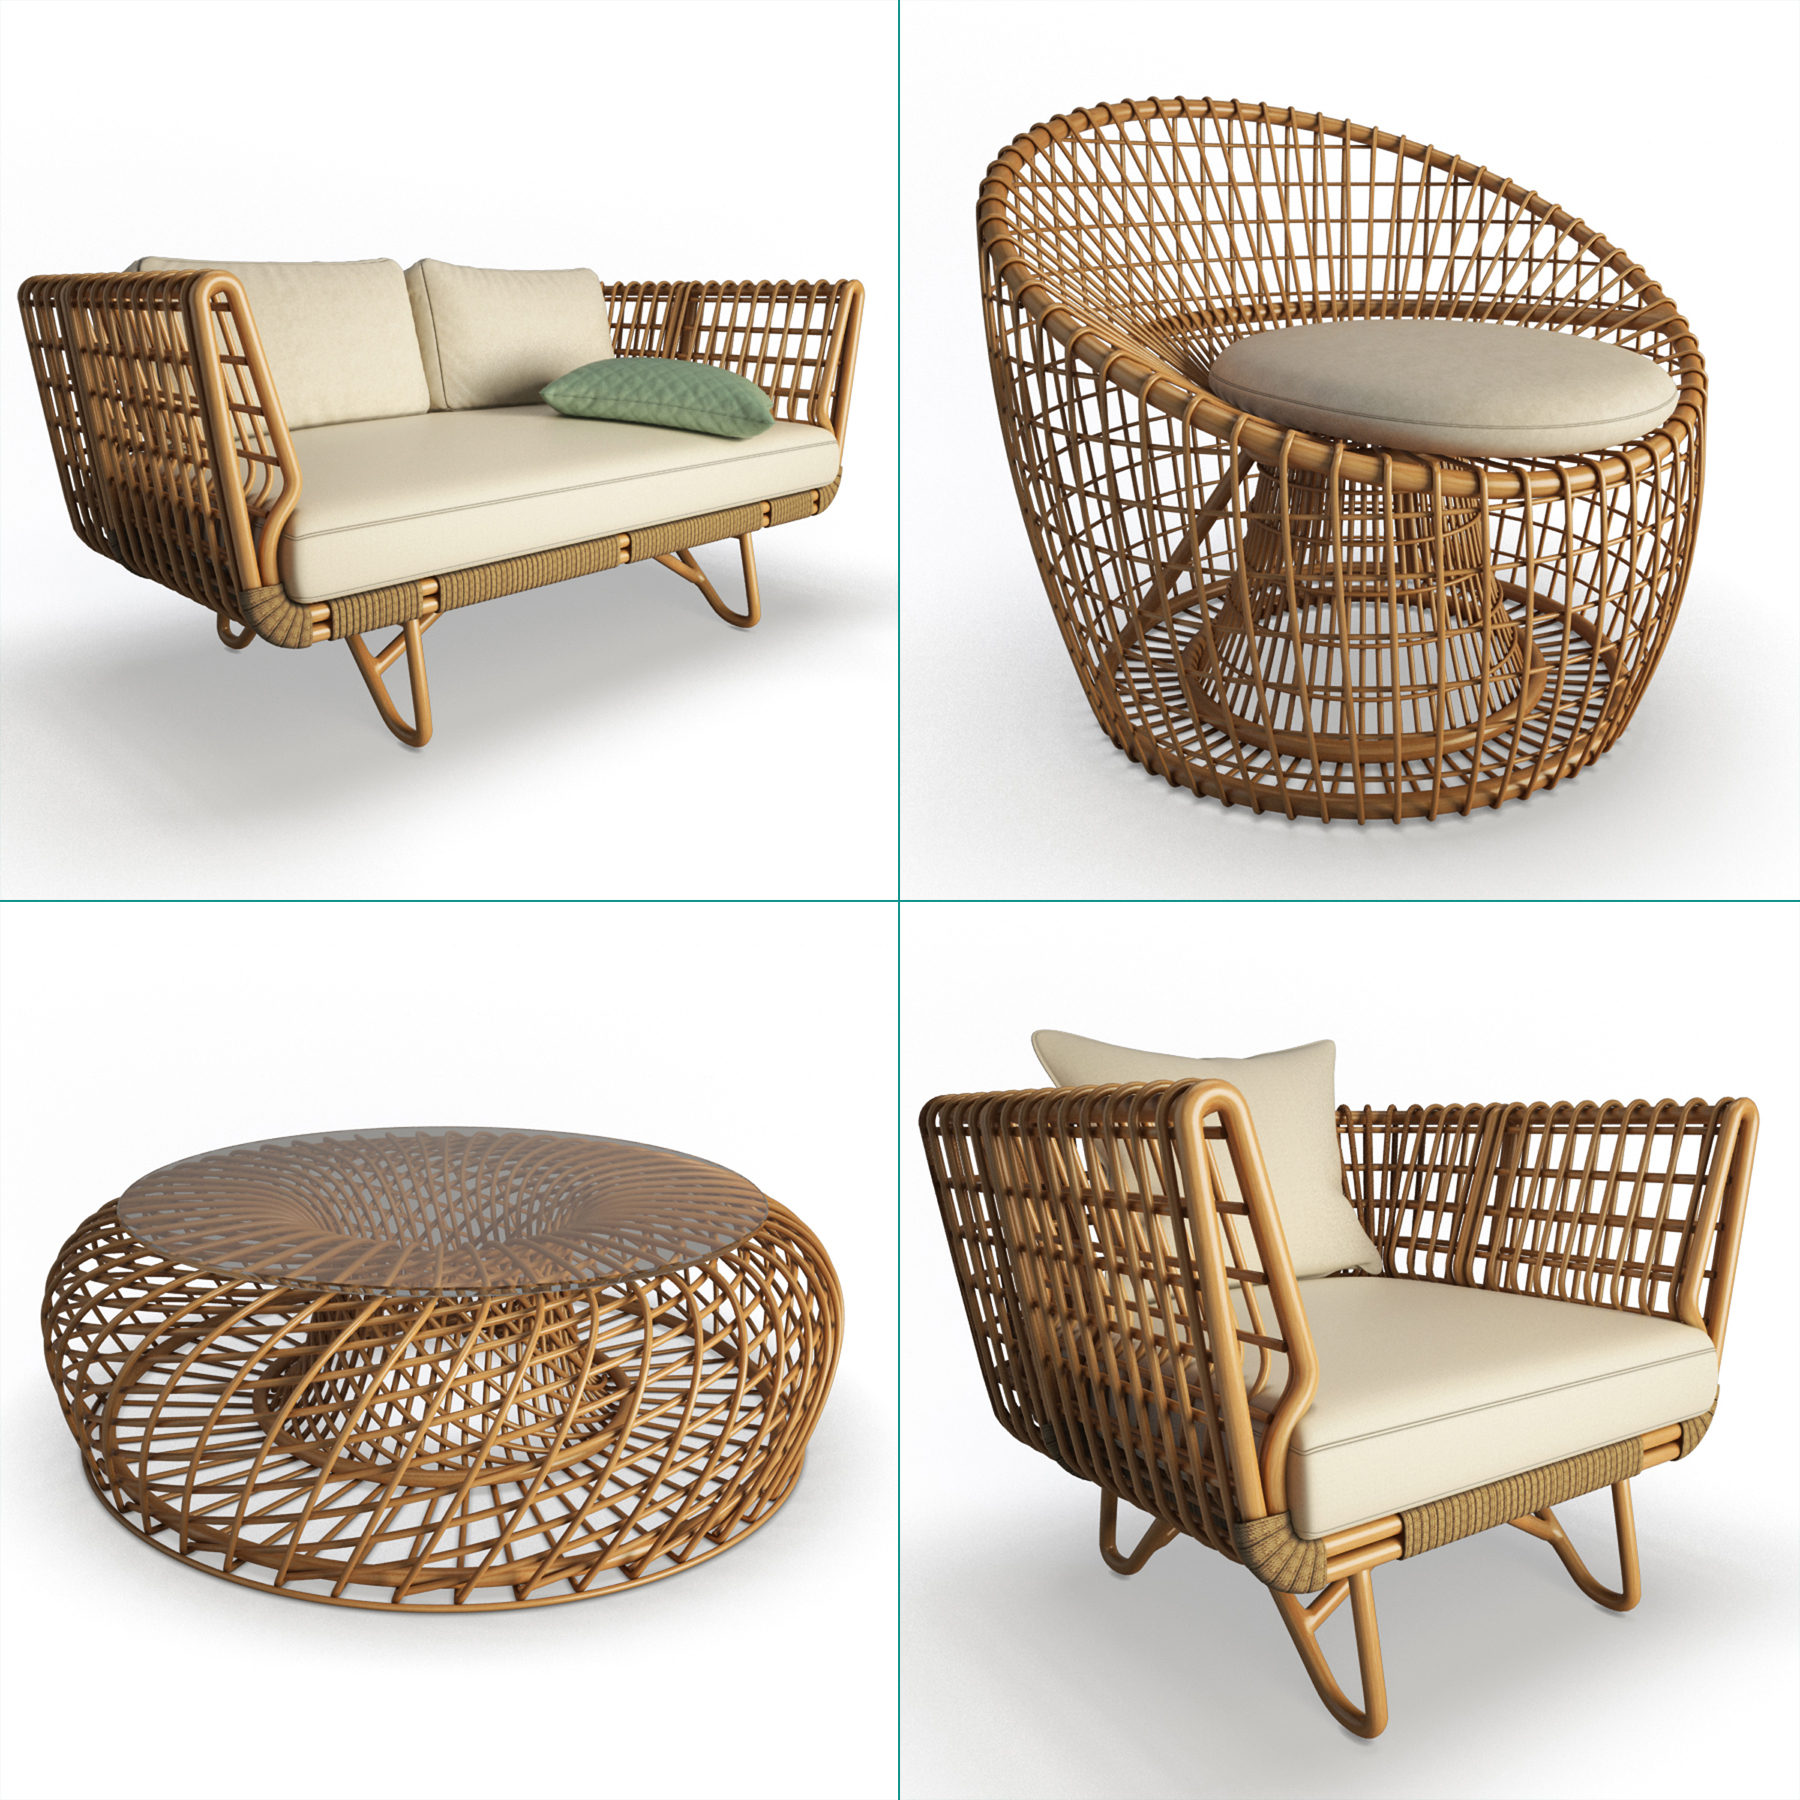 Natural Materials Rattan, Wicker, Cane Bohemian Bliss 2020 – PadStyle